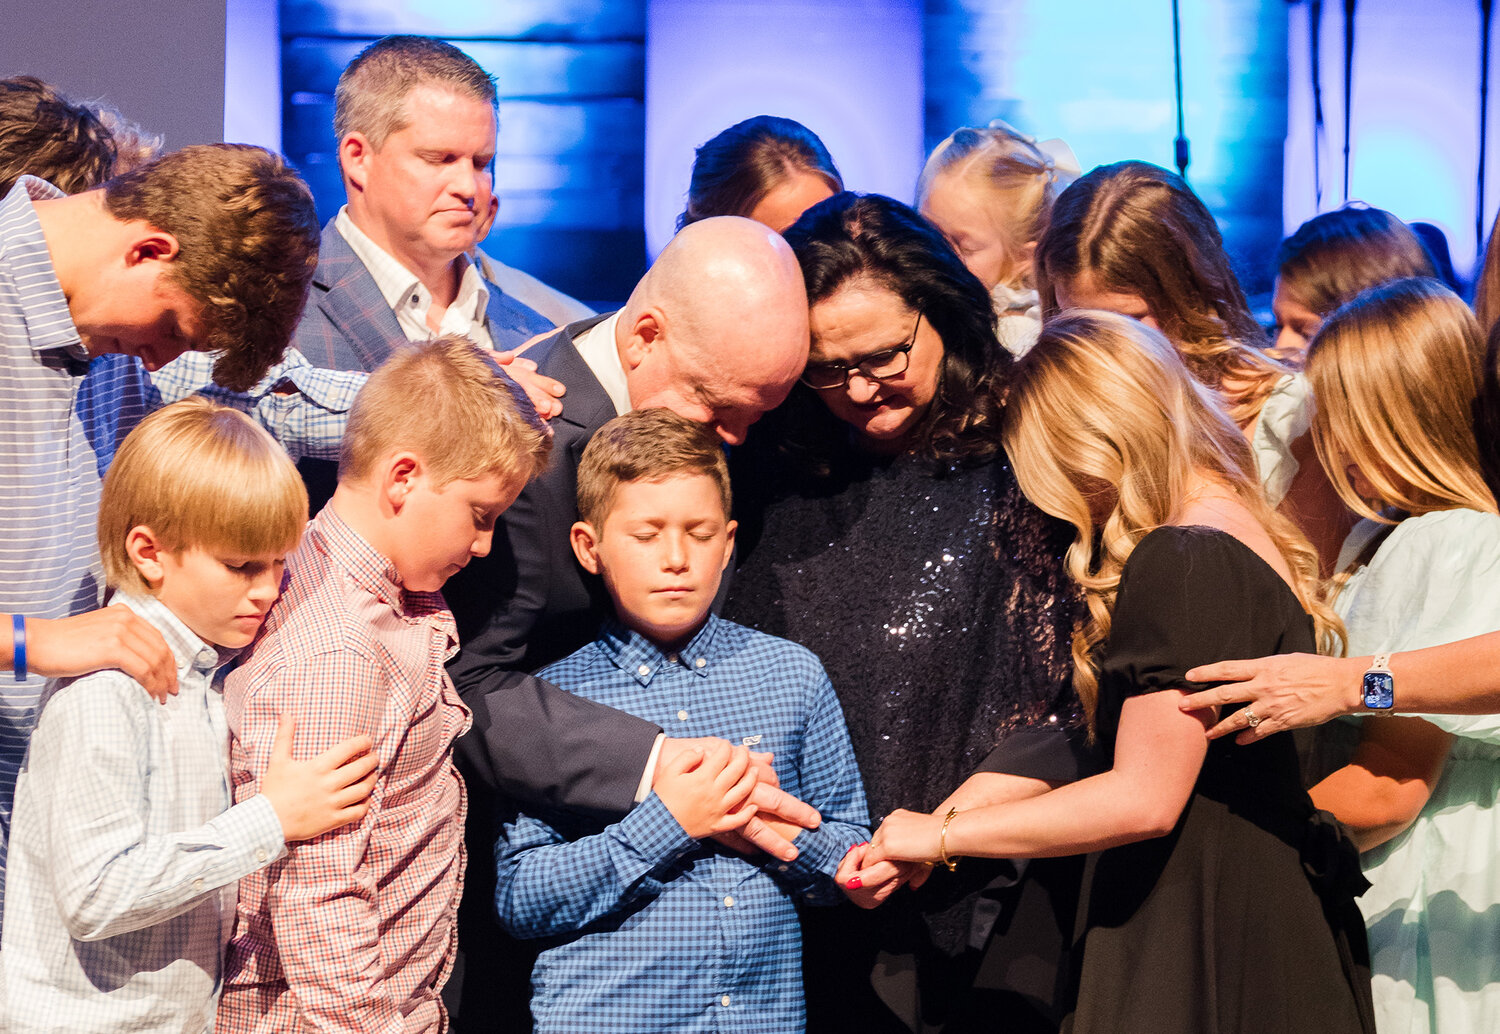 The Akin family prays during a celebration of the Akins' 20 years of service to Southeastern Seminary. (SEBTS/Rebessa Hankins)